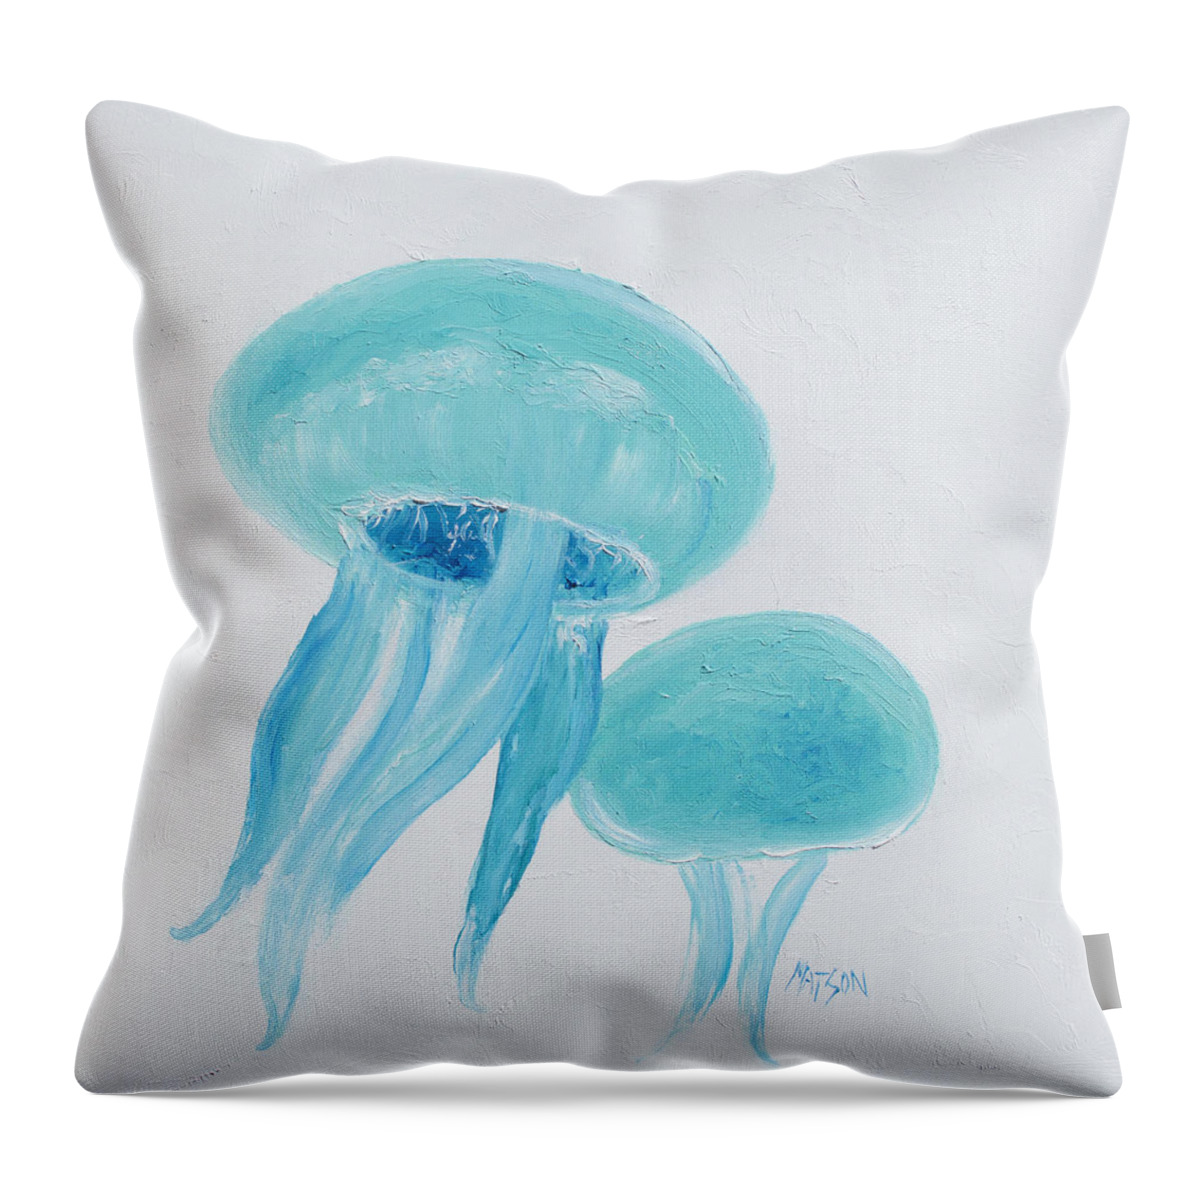 Jellyfish Throw Pillow featuring the painting Turquoise Jellyfish by Jan Matson